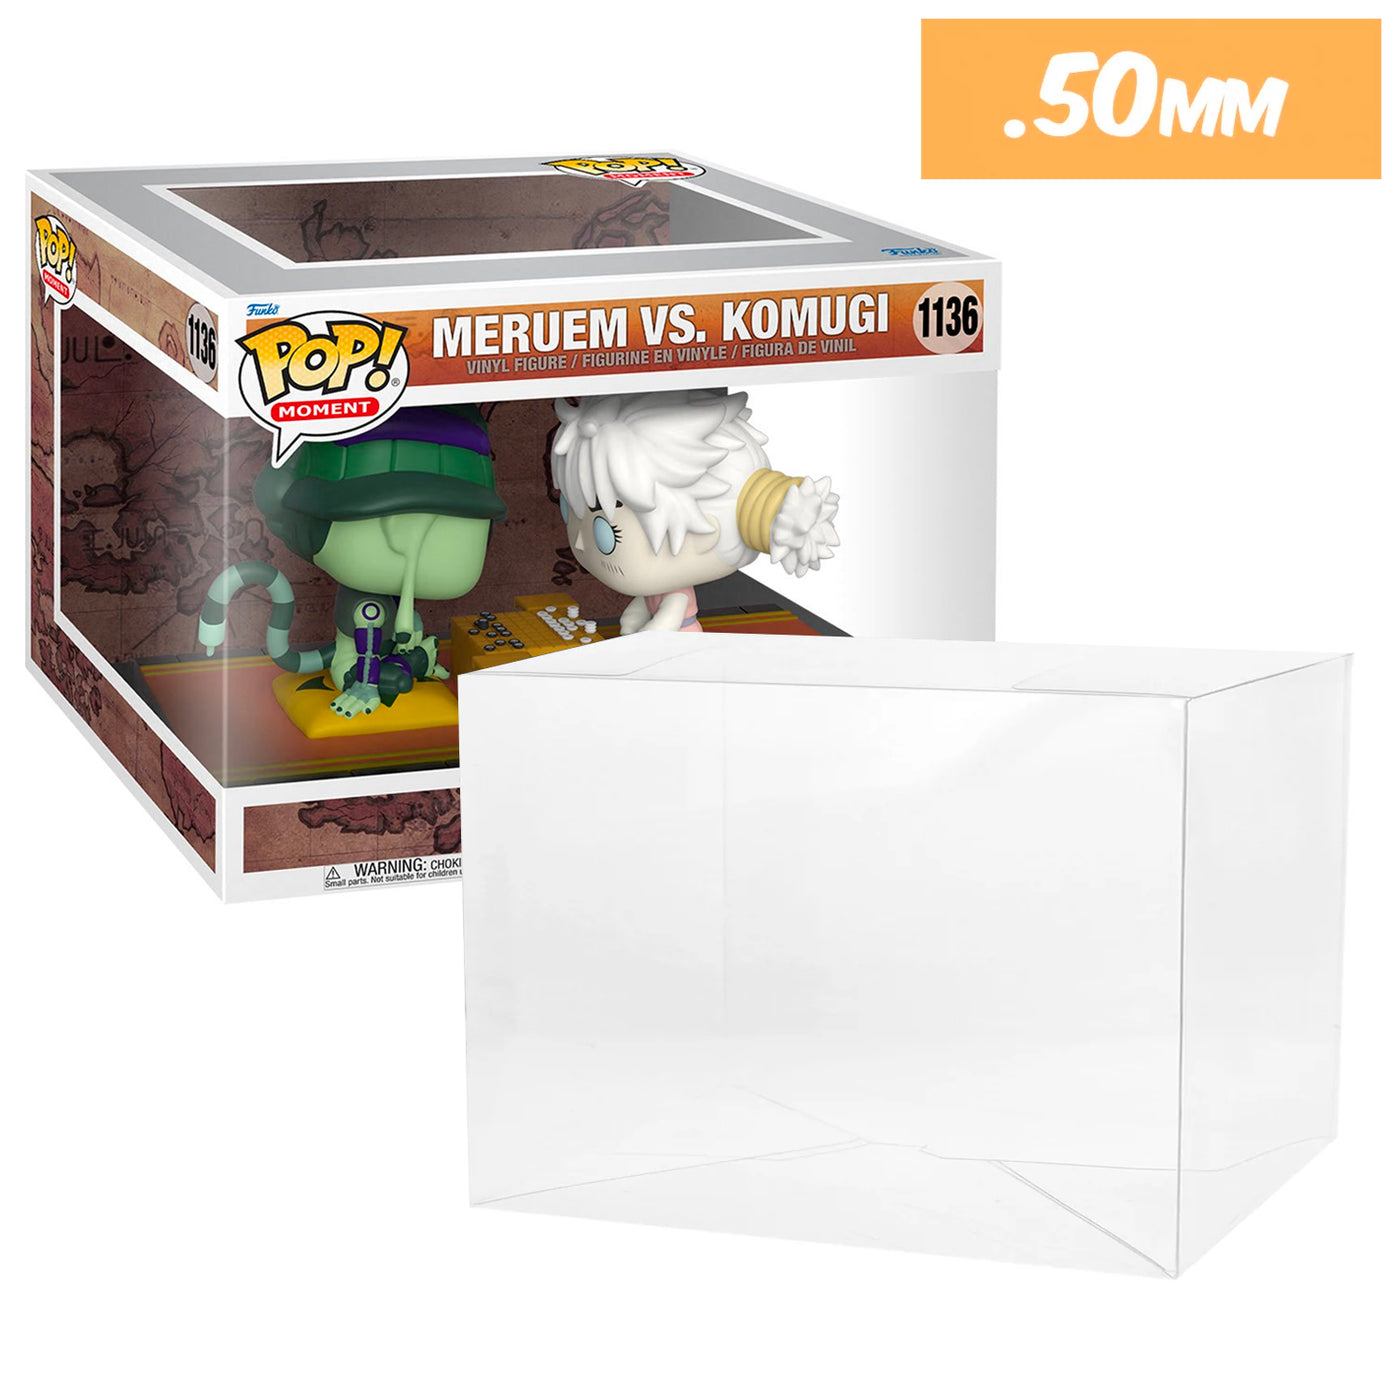 hunter x hunter meruem vs komugi pop moment best funko pop protectors thick strong uv scratch flat top stack vinyl display geek plastic shield vaulted eco armor fits collect protect display case kollector protector